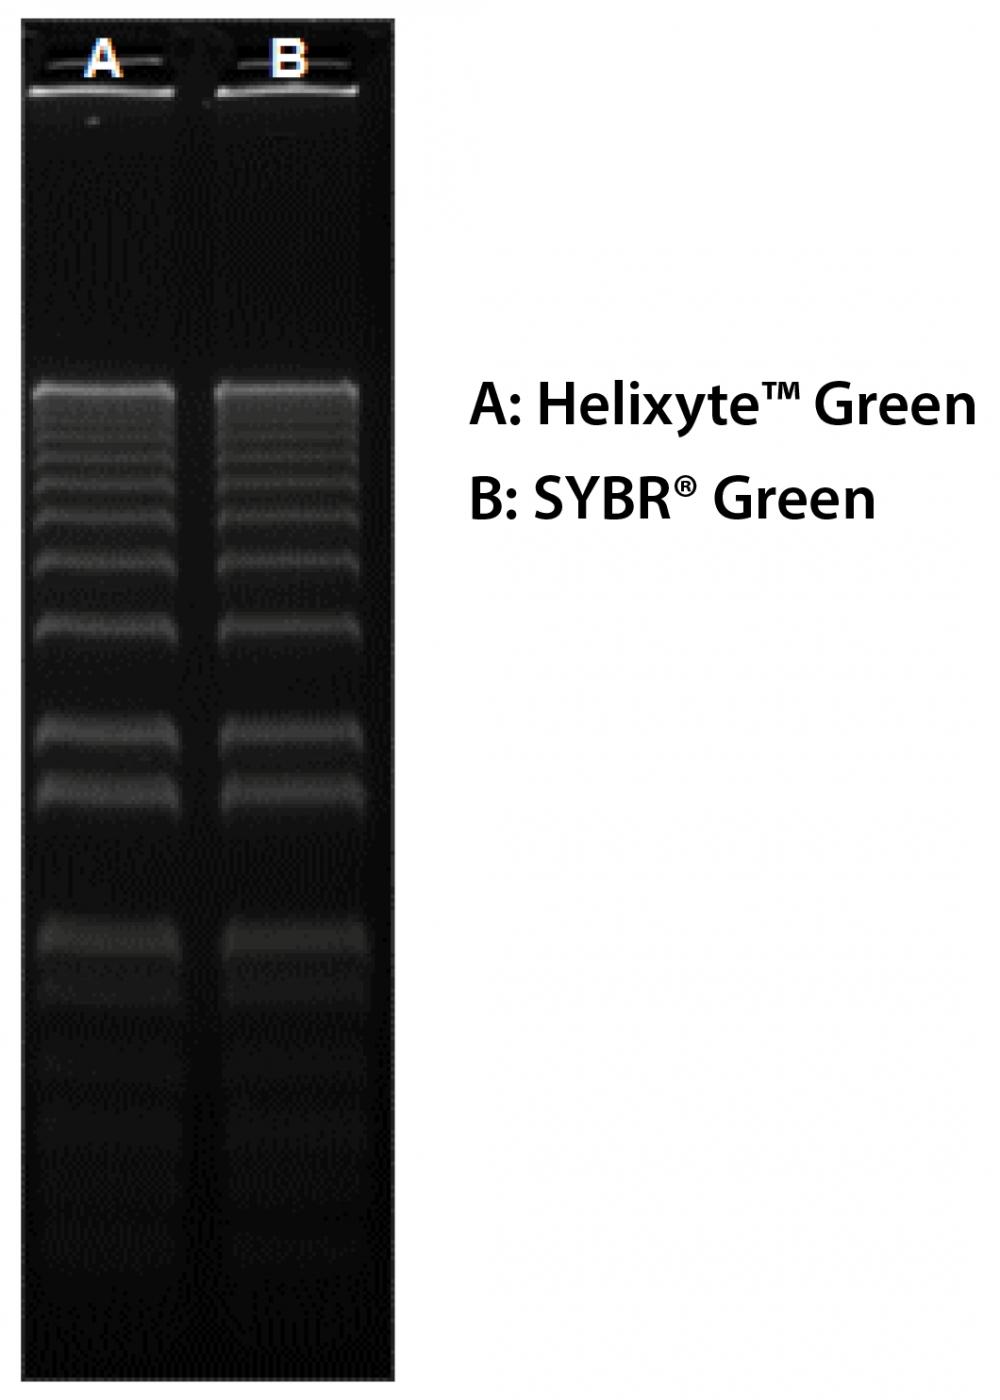 160 ng of 1 Kb Plus DNA Ladder (ThermoFisher 10787018) in 0.9% agarose/TBE electrophoresis gel were stained with Helixyte&trade; Green and SYBR&reg; Green and imaged with 254-nm UV transilluminator using UVP Bioimaging System.